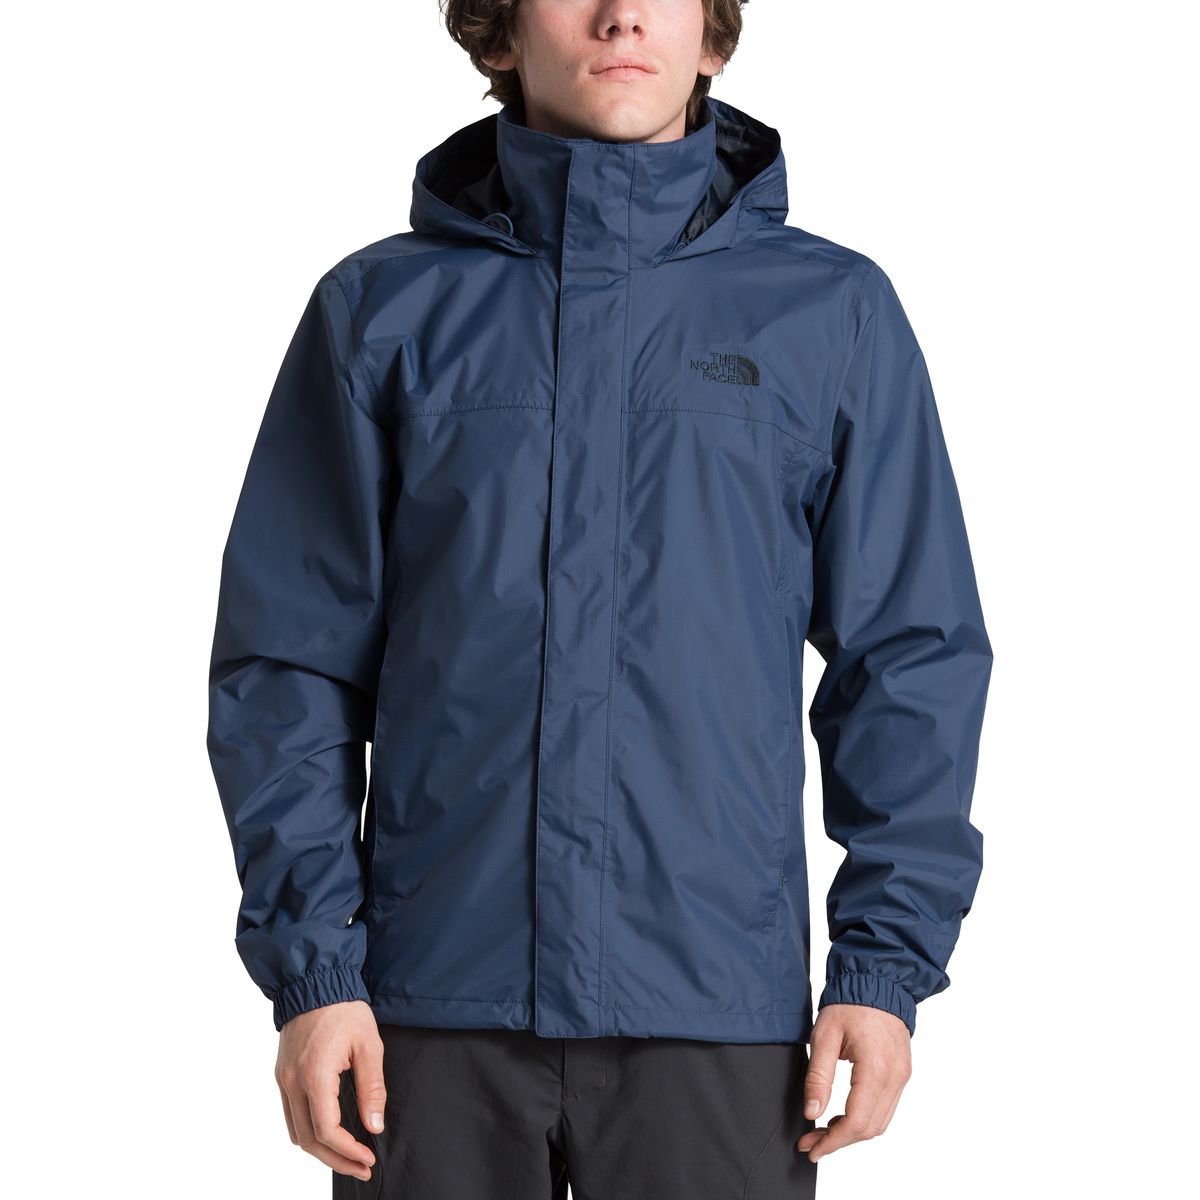 The North Face Resolve 2 Hooded Jacket - Men's